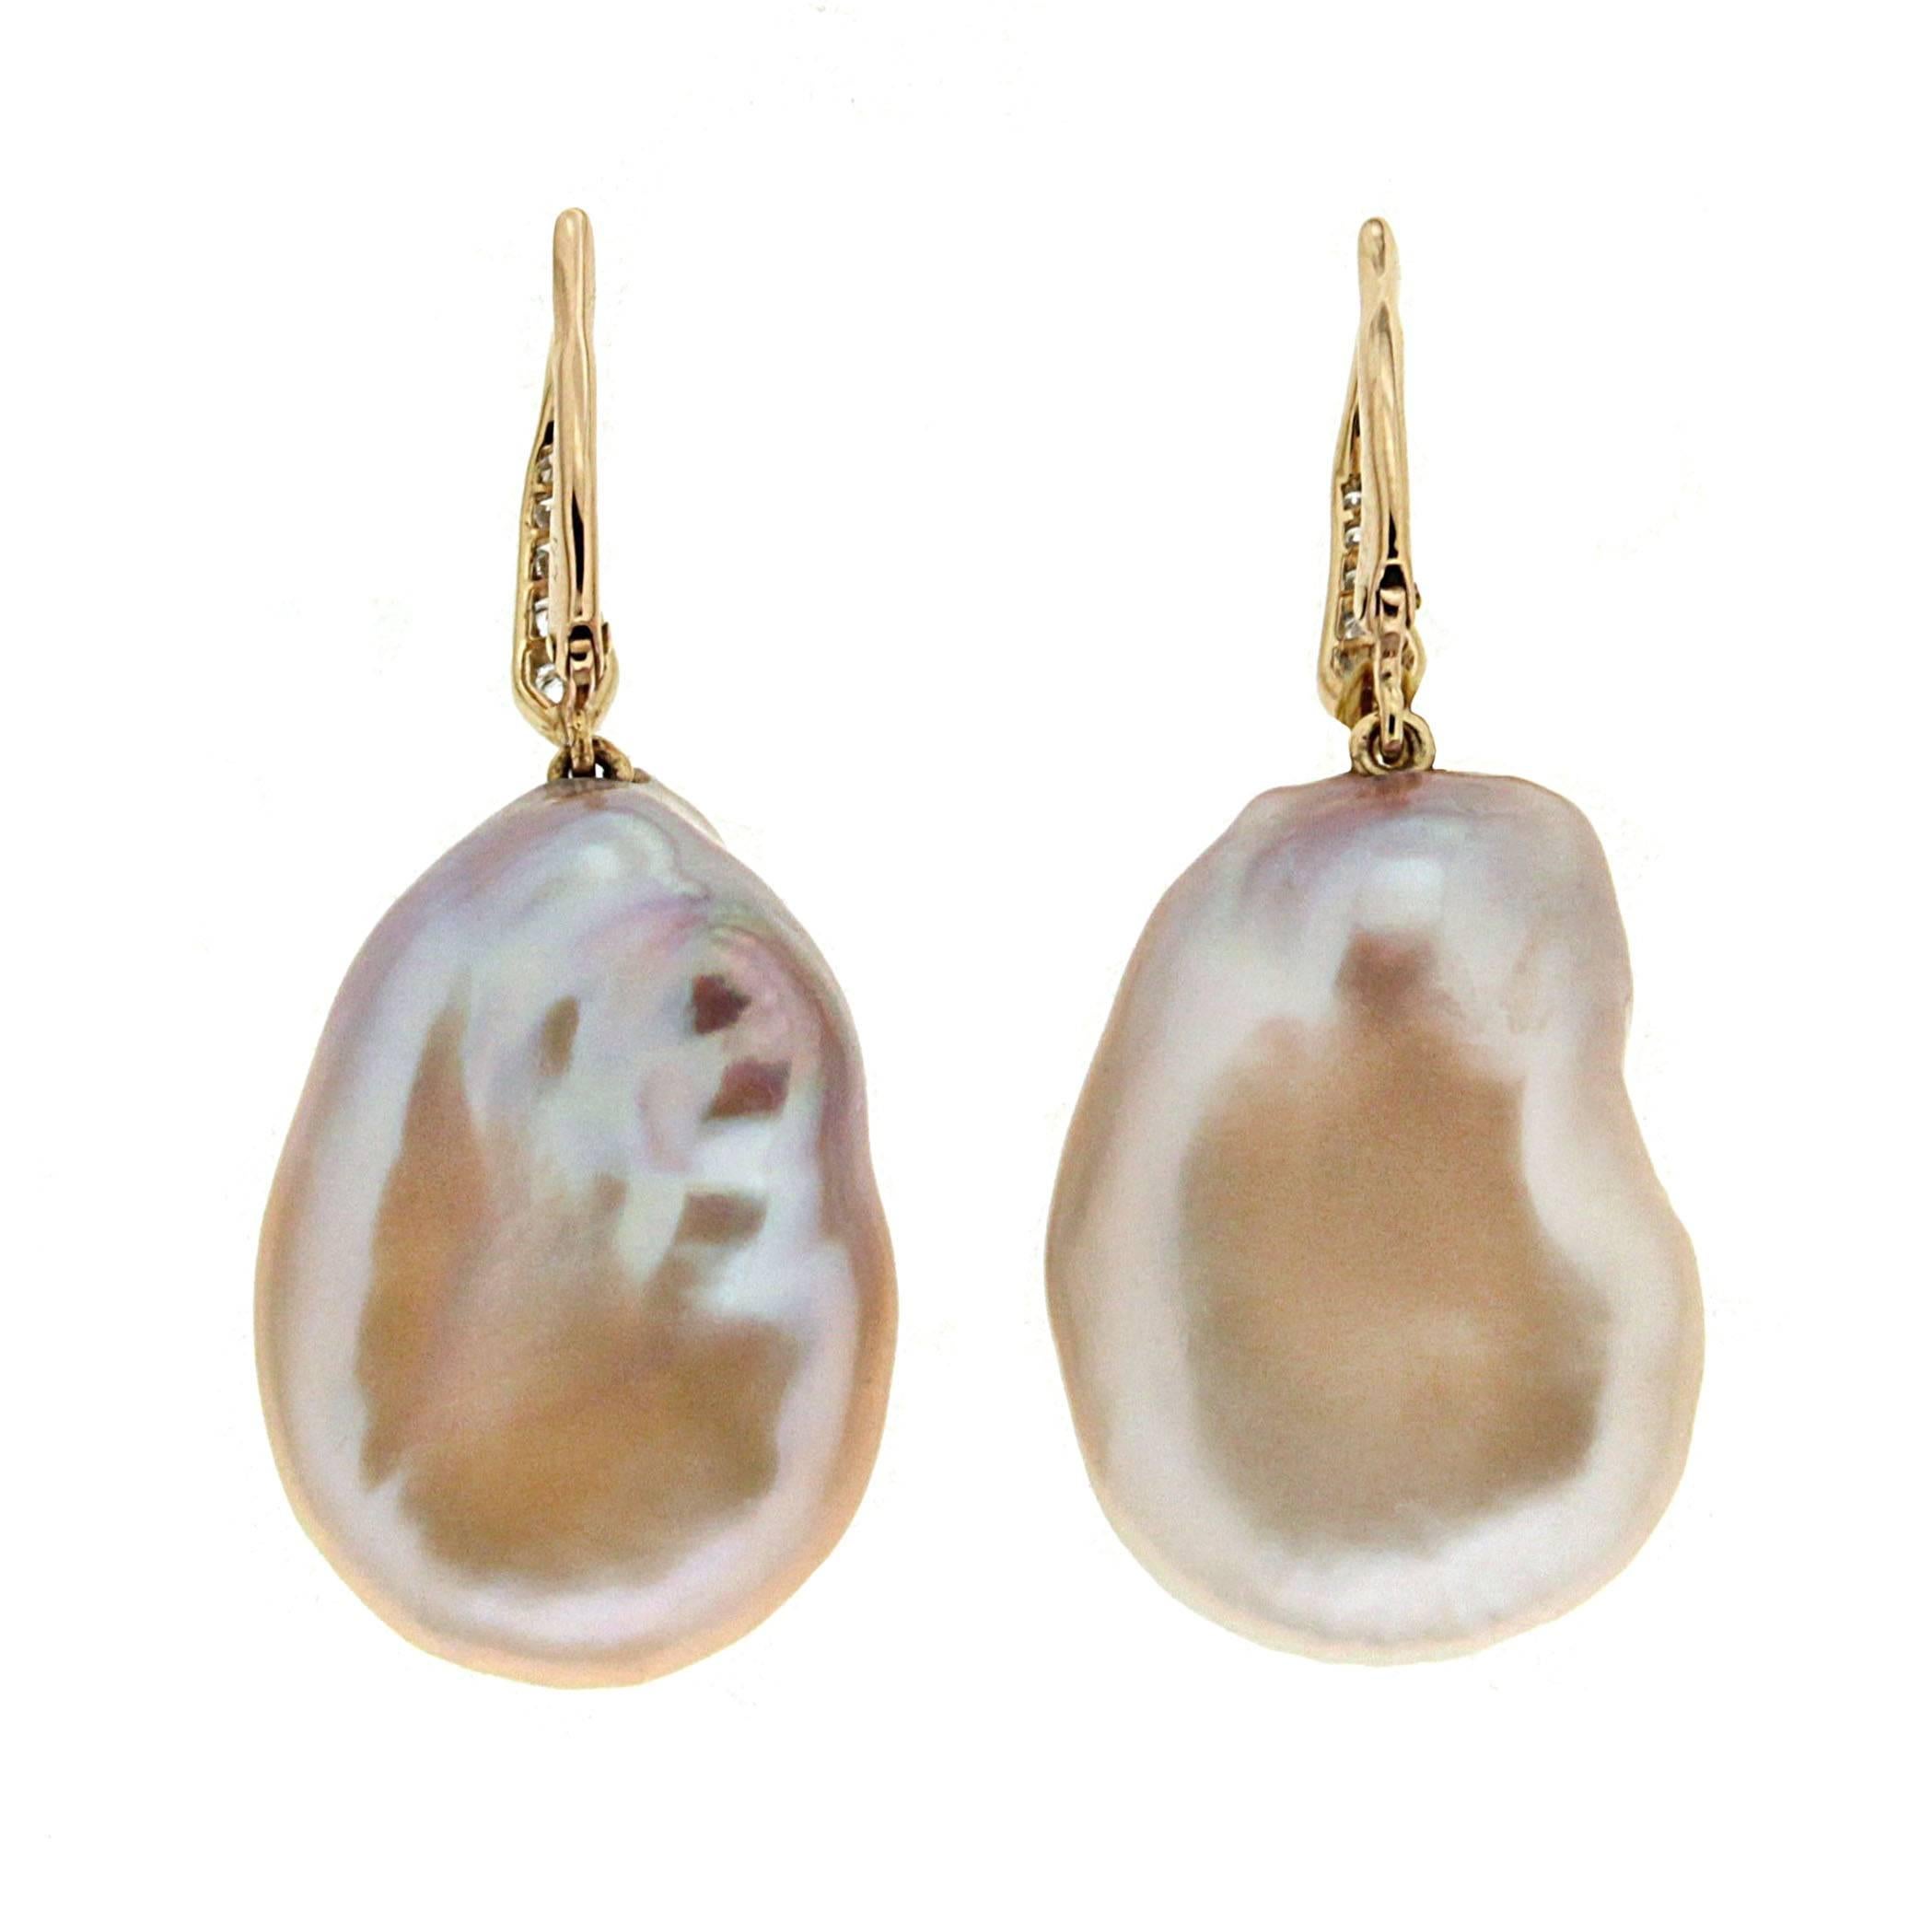 This pair of lovely Fresh Water Baroque Toast Pearl drop earrings is finished in 18kt yellow gold with diamond lever backs. The result is a unique jewel and the perfect gift for any occasion.